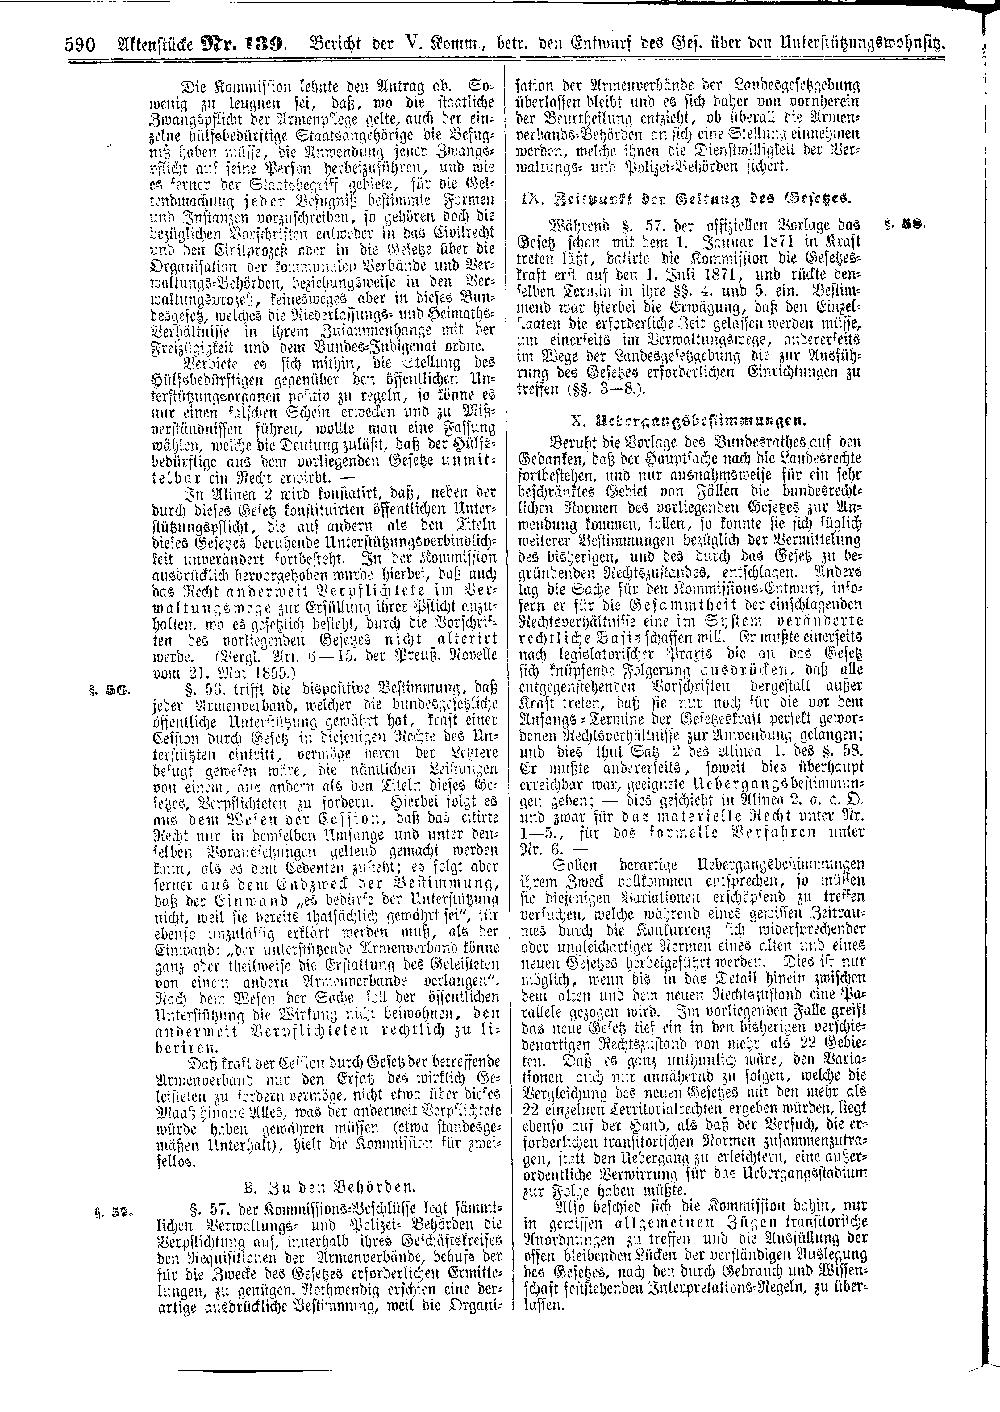 Scan of page 590